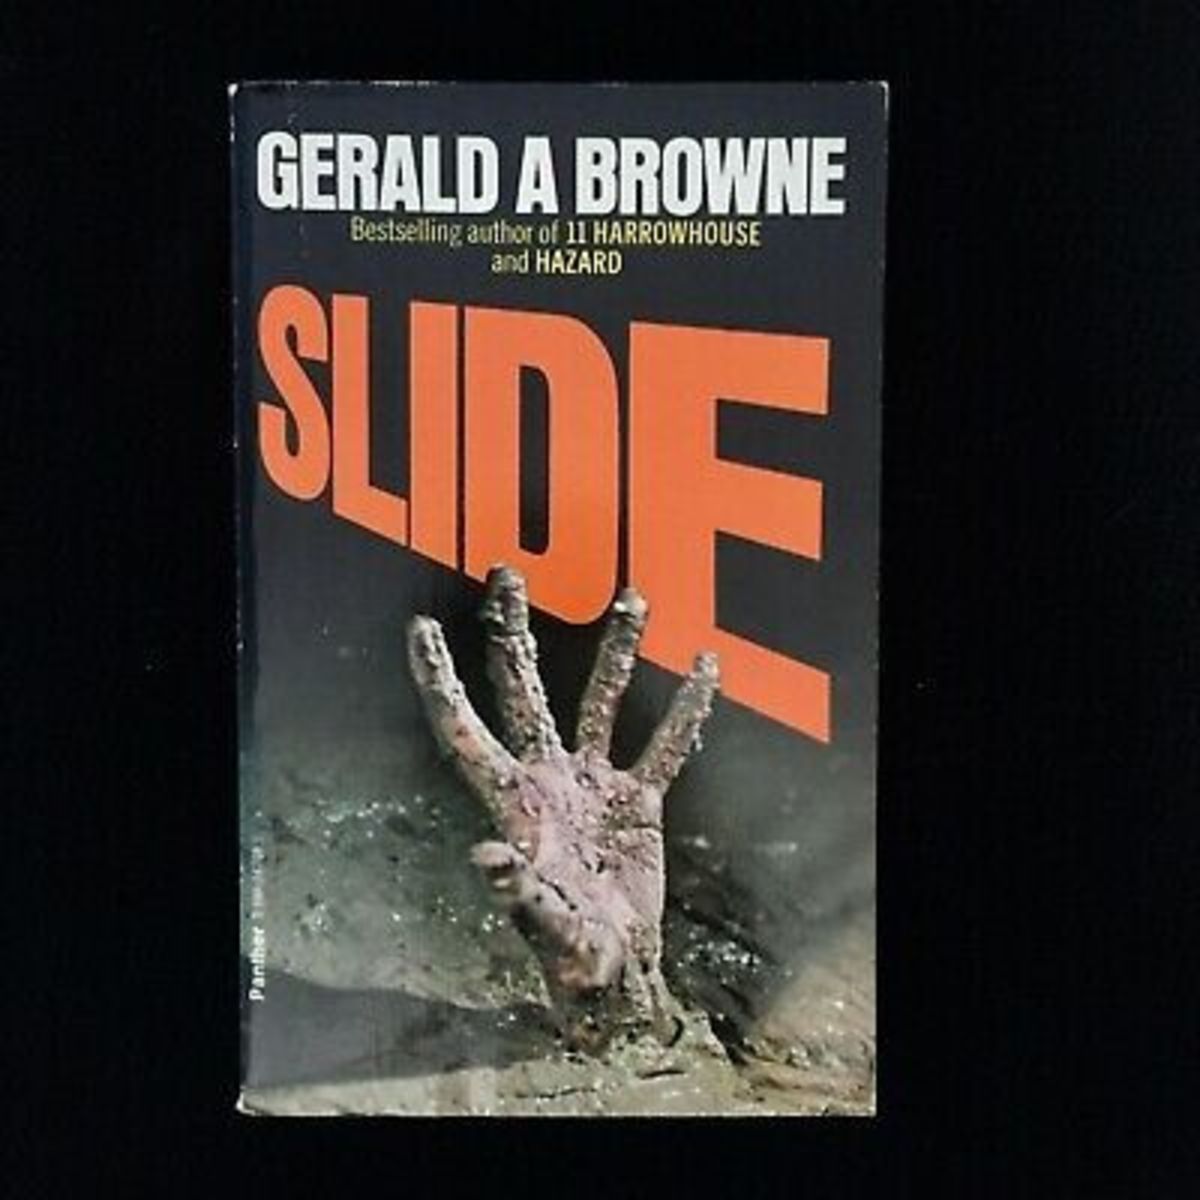 Retro Reading: Slide by Gerald A. Browne